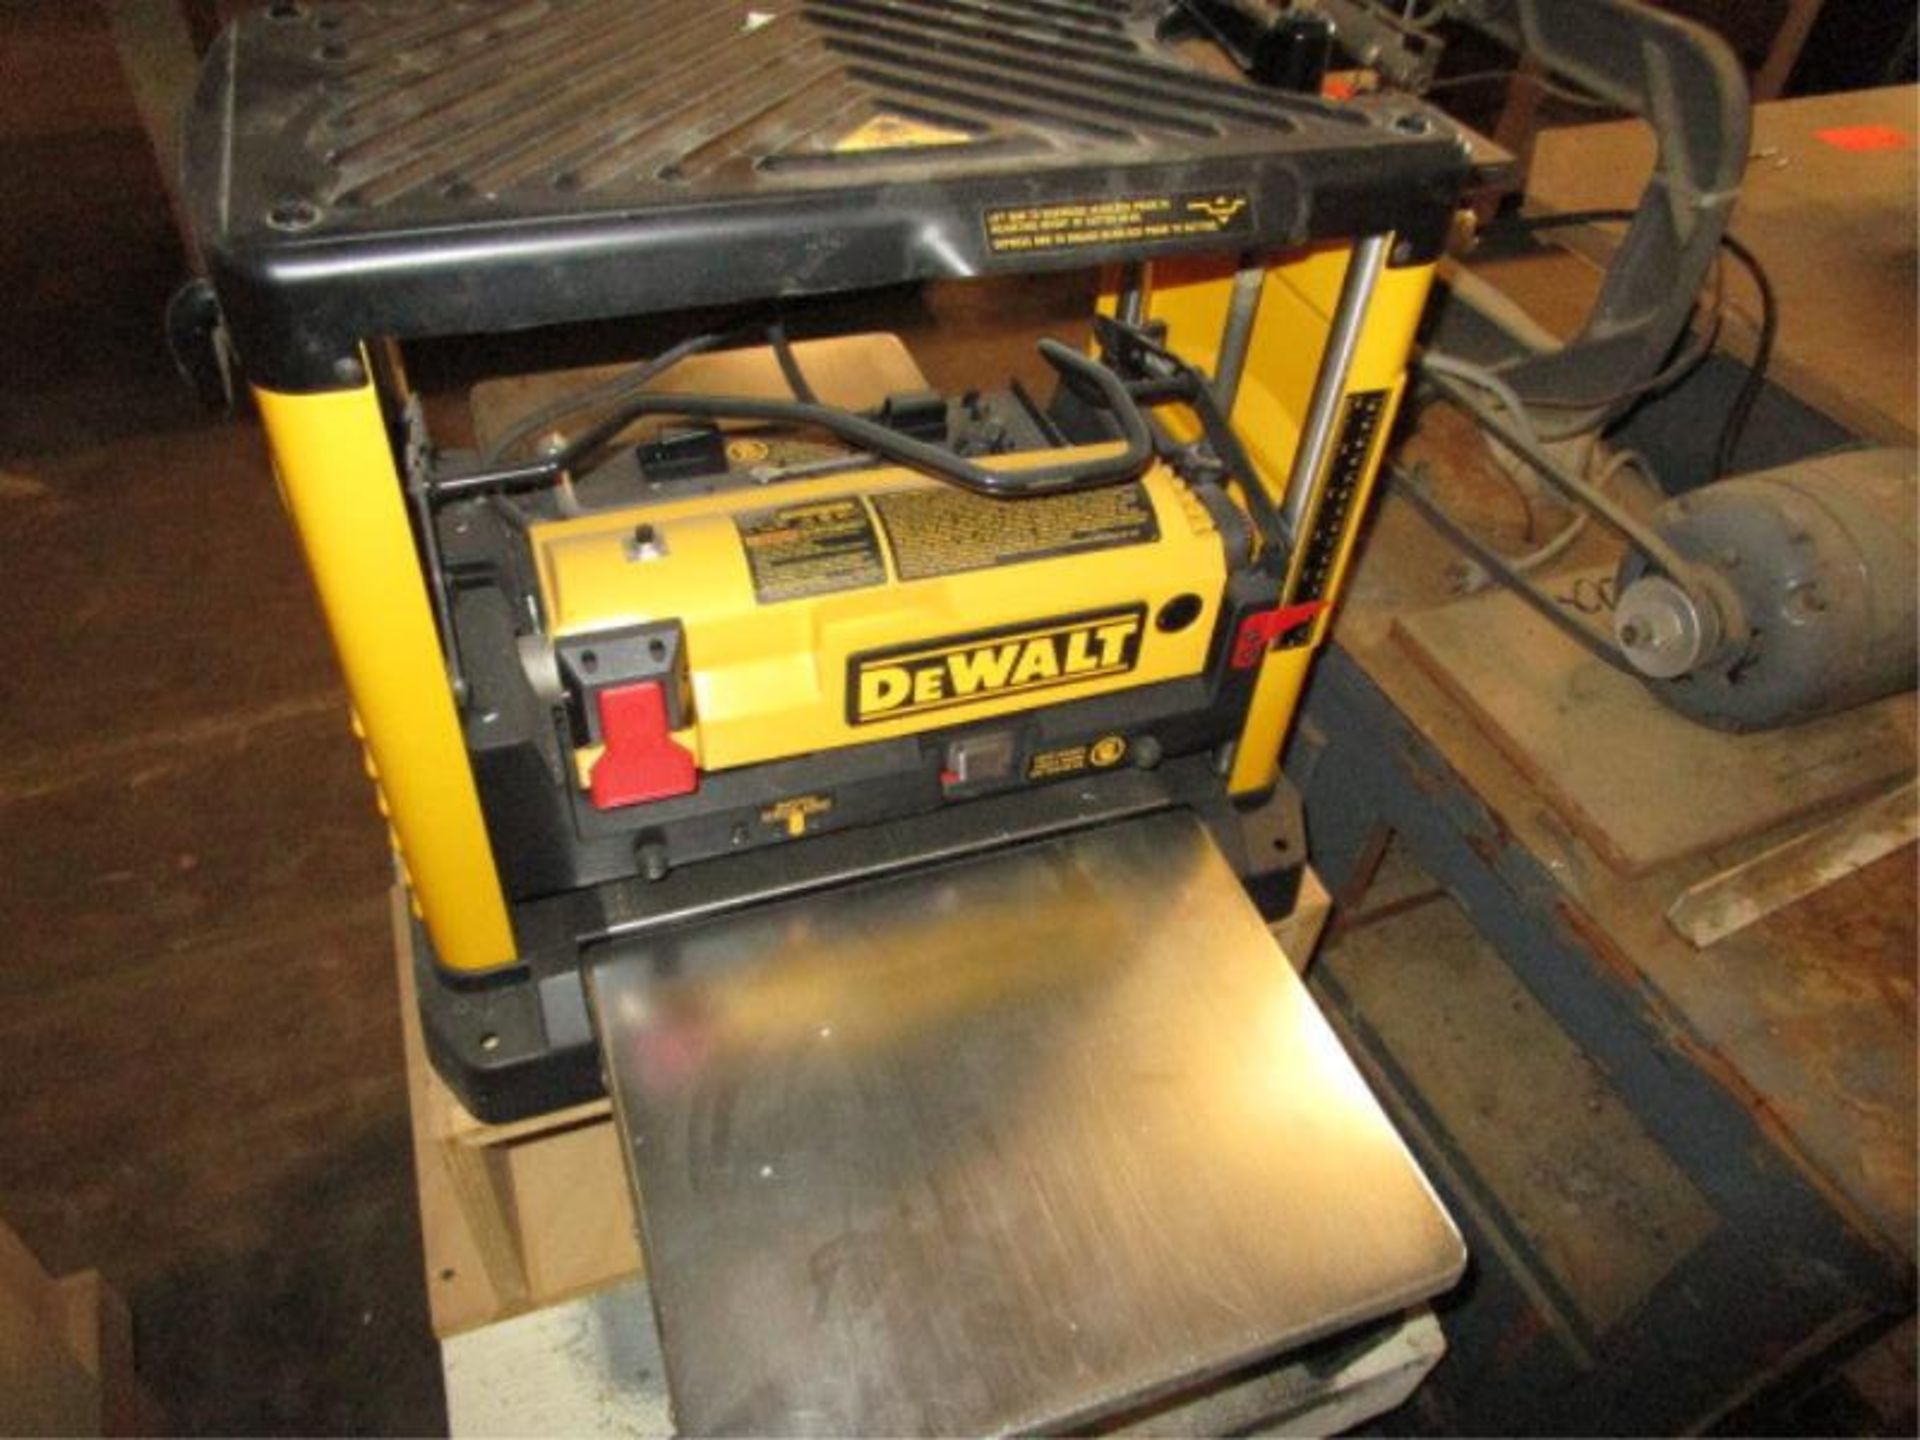 Thickness Planer w/ Stant by Delta, Model: DW733 - Image 7 of 7